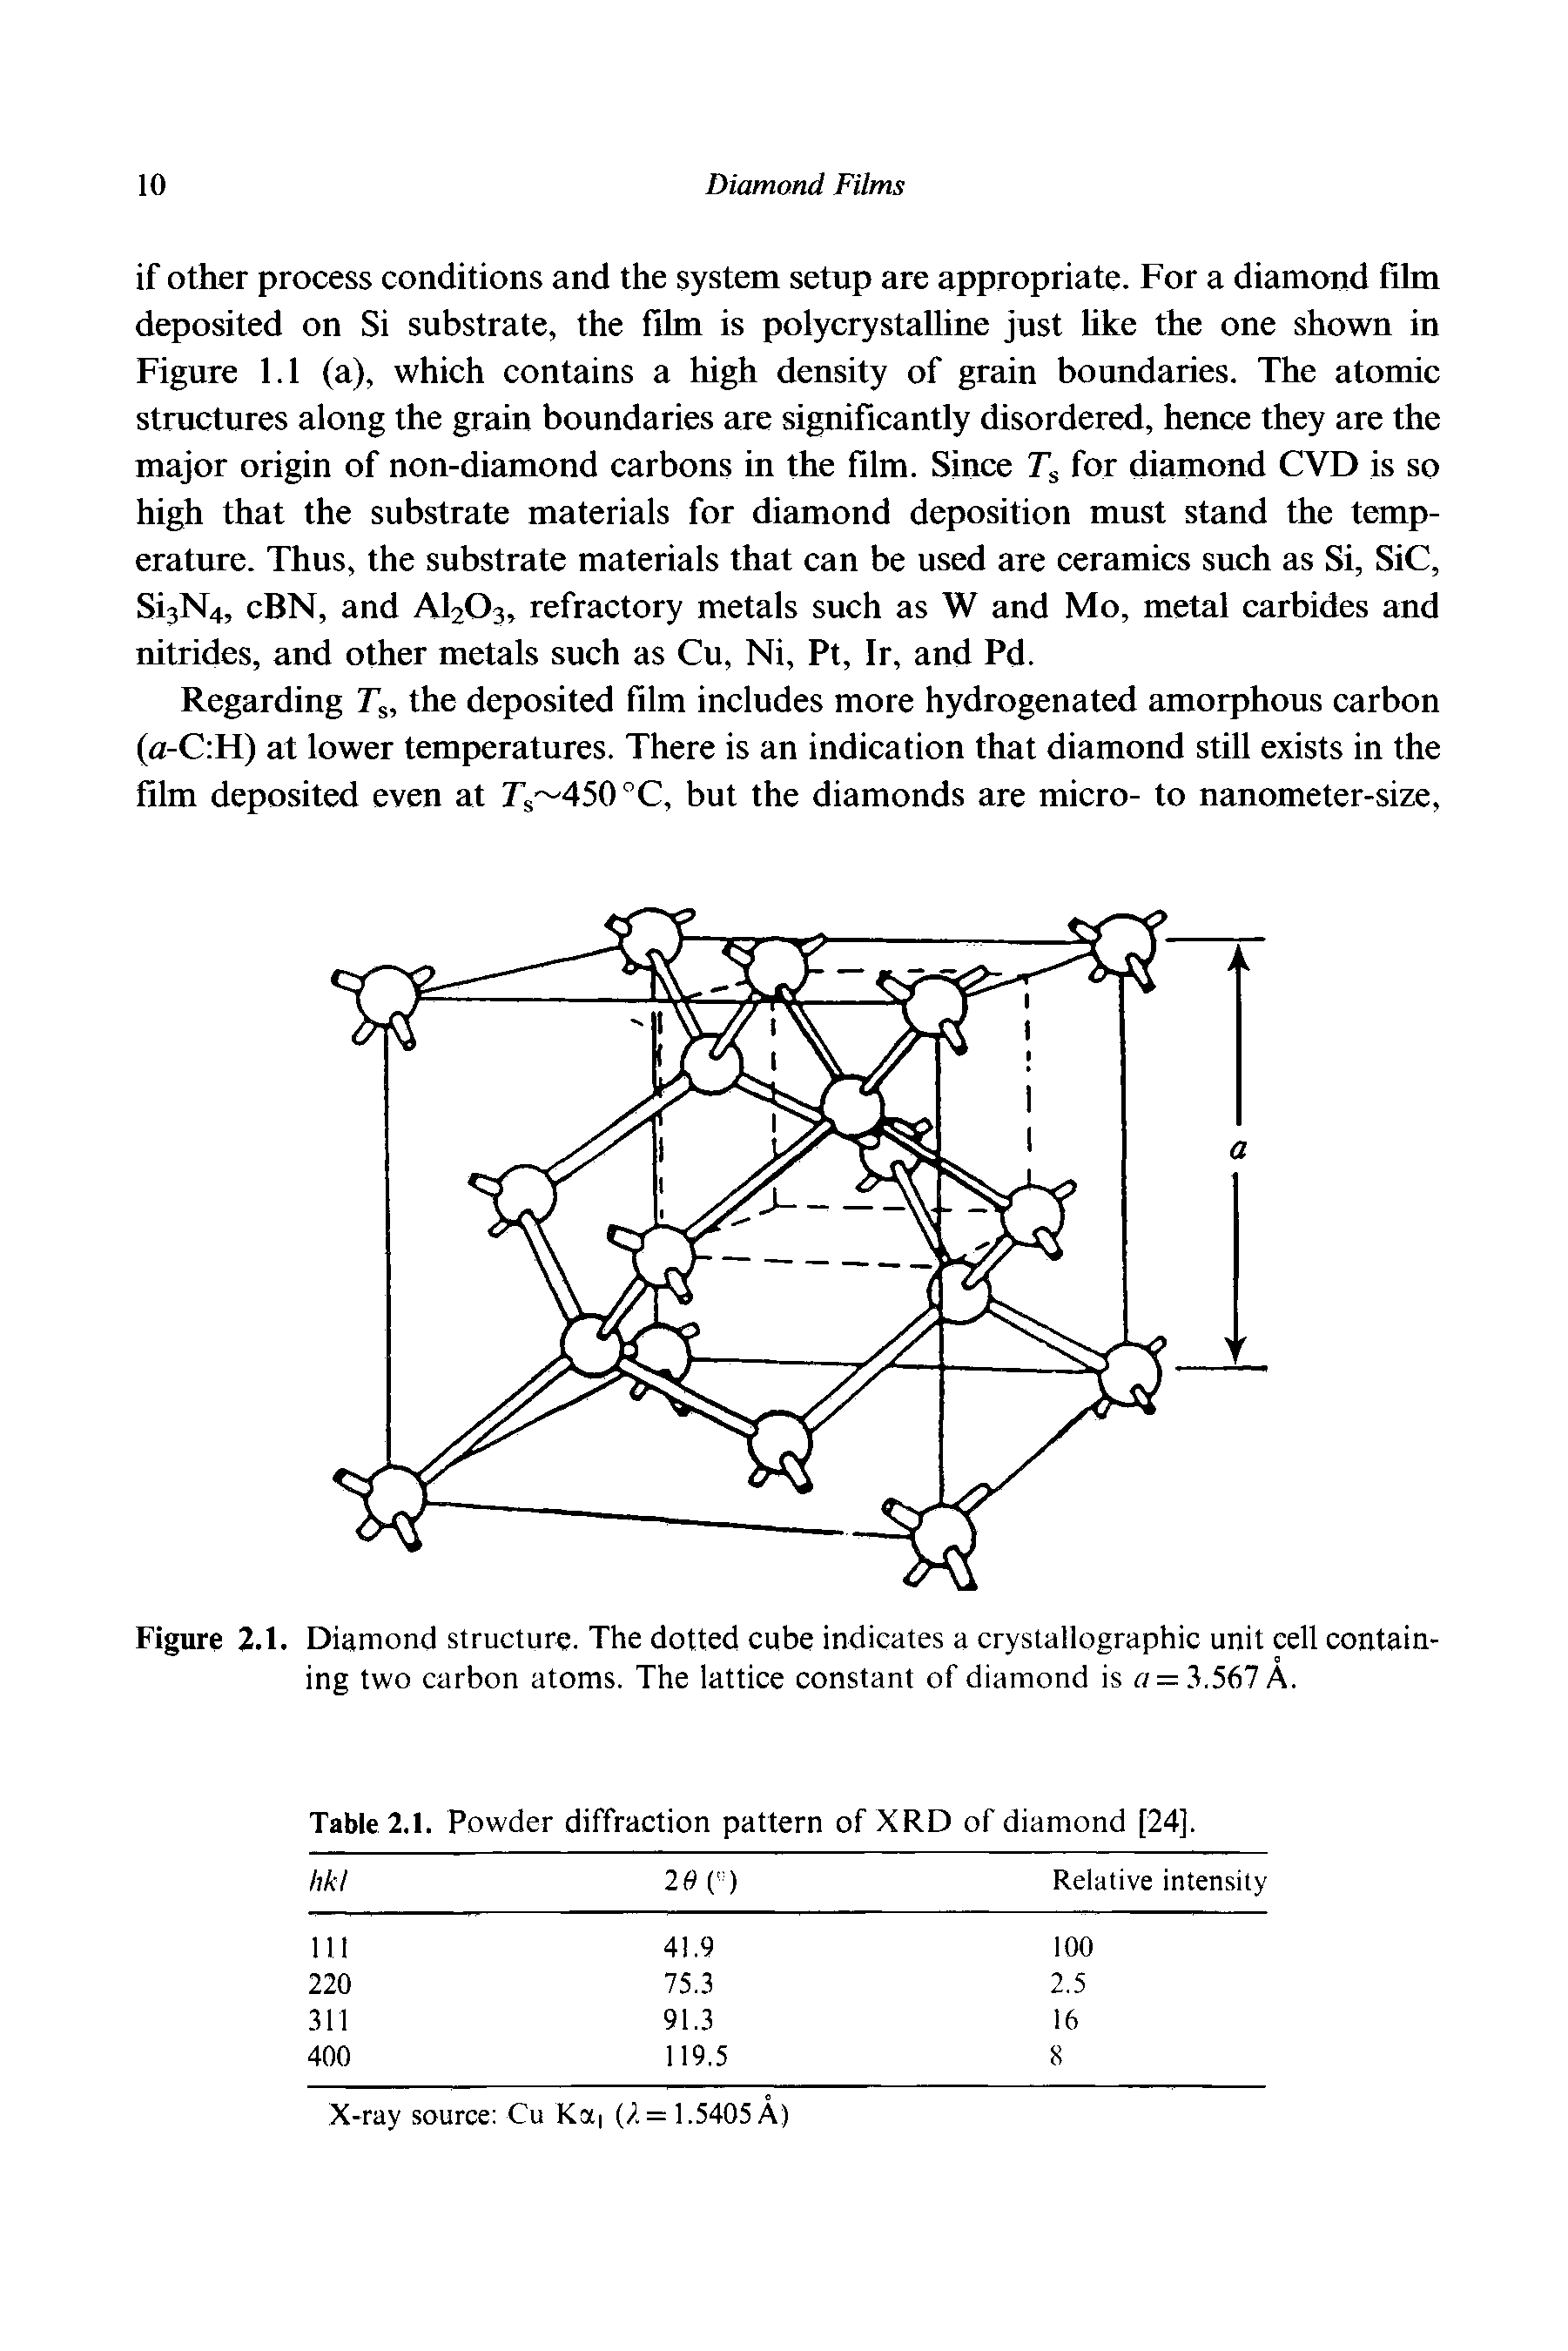 Figure 2.1. Diamond structure. The dotted cube indicates a crystallographic unit cell containing two carbon atoms. The lattice constant of diamond is fl =. t.567A.